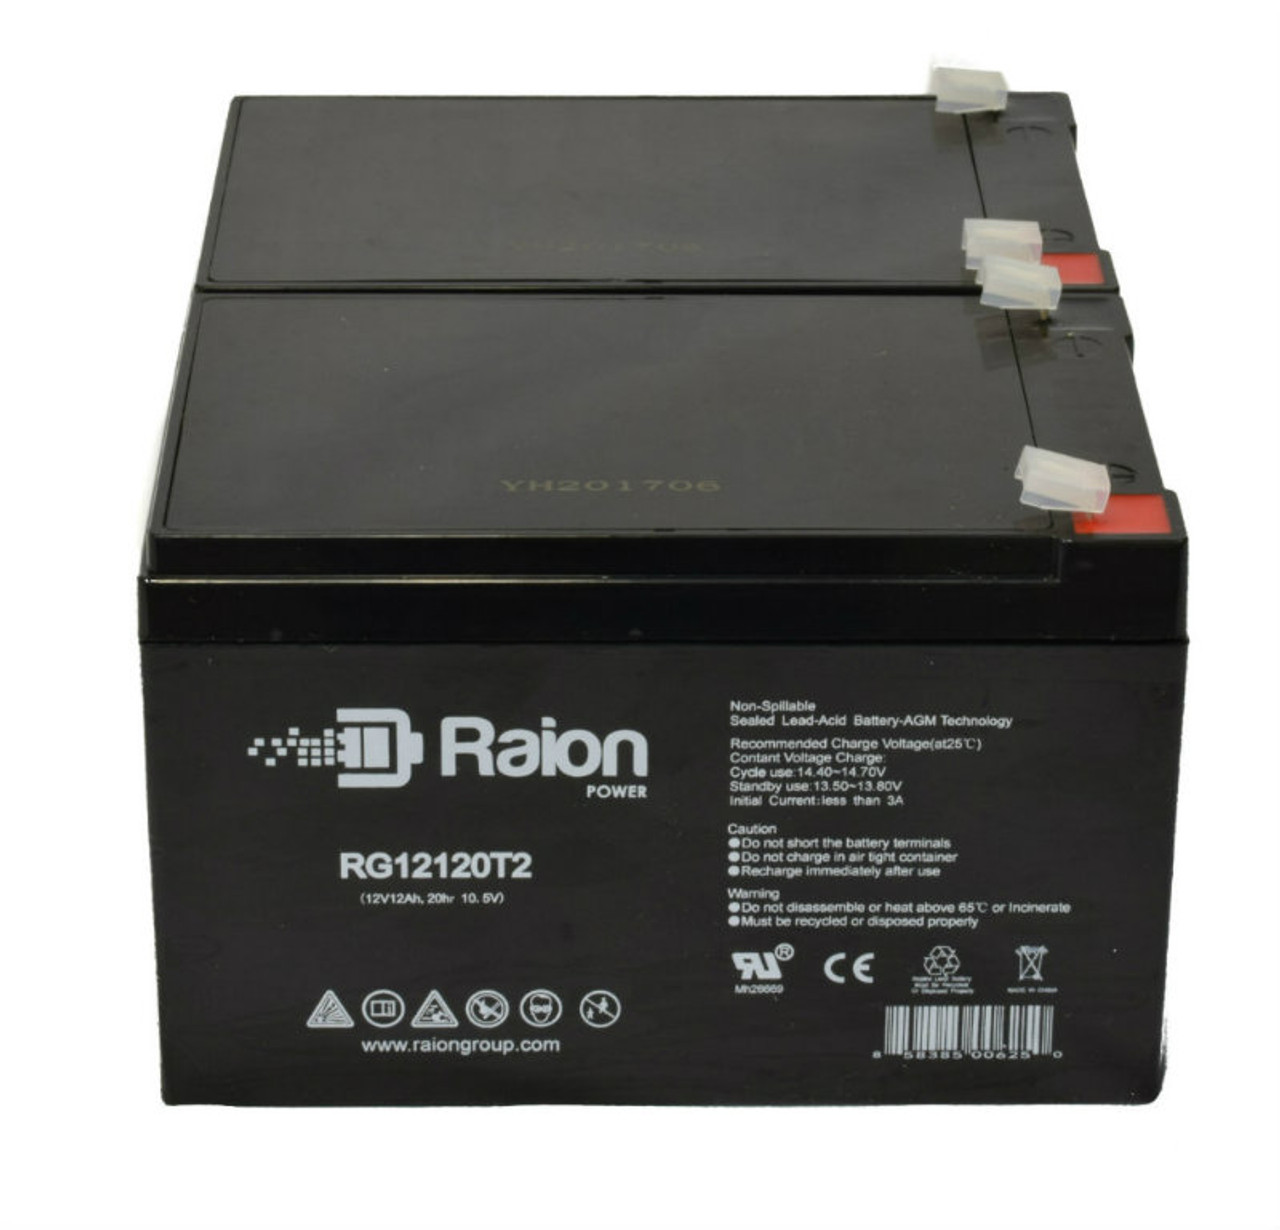 Raion Power 12V 12Ah Non-Spillable Compatible Replacement Battery for Zeus Battery PC12-12 - (2 Pack)